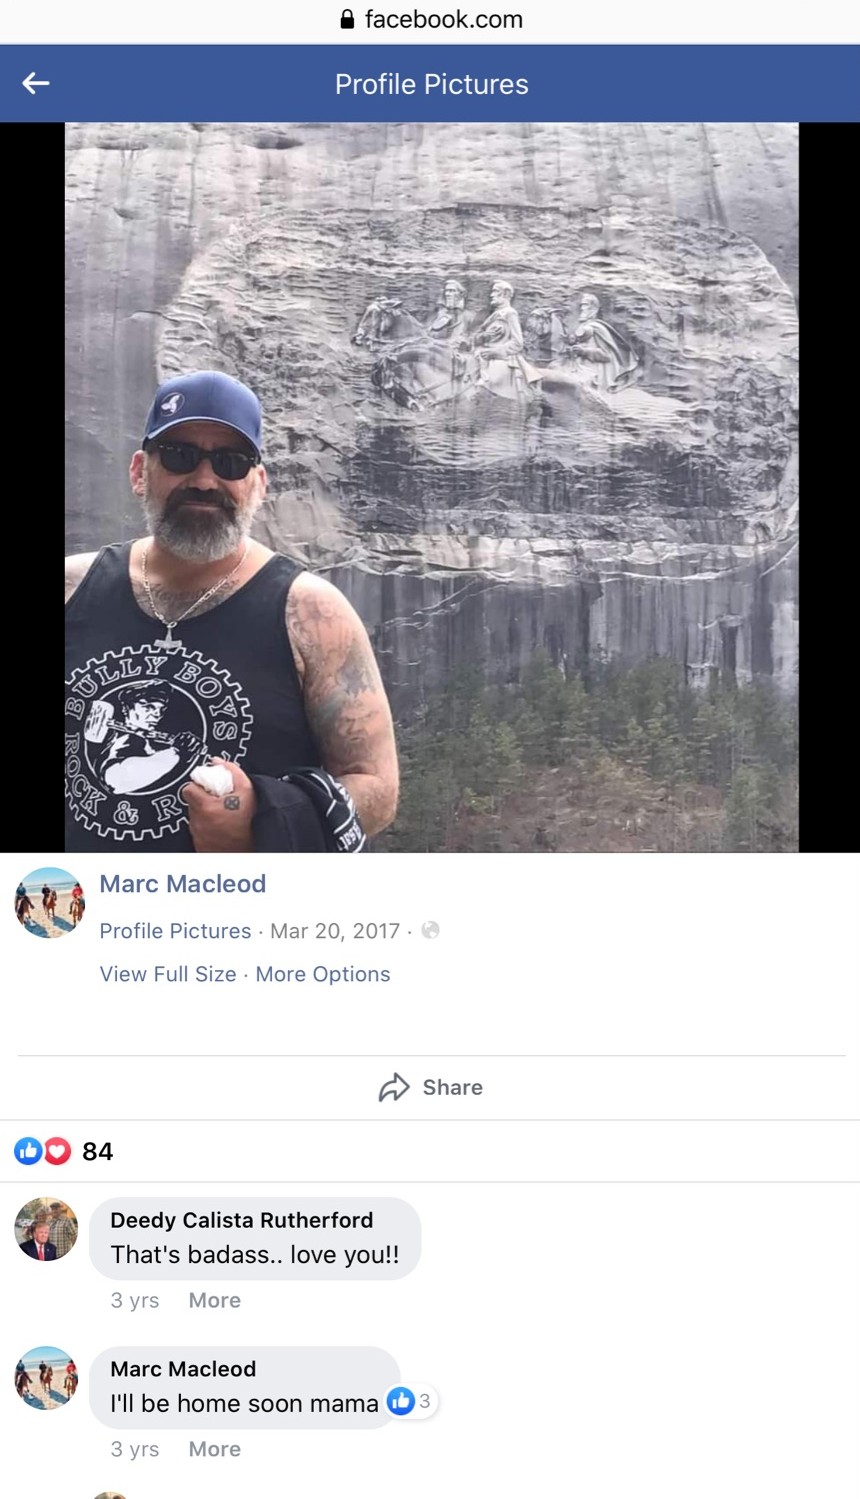 Marc Macleod posing in front of the Confederate monument in Stone Mountain, GA in May 2017